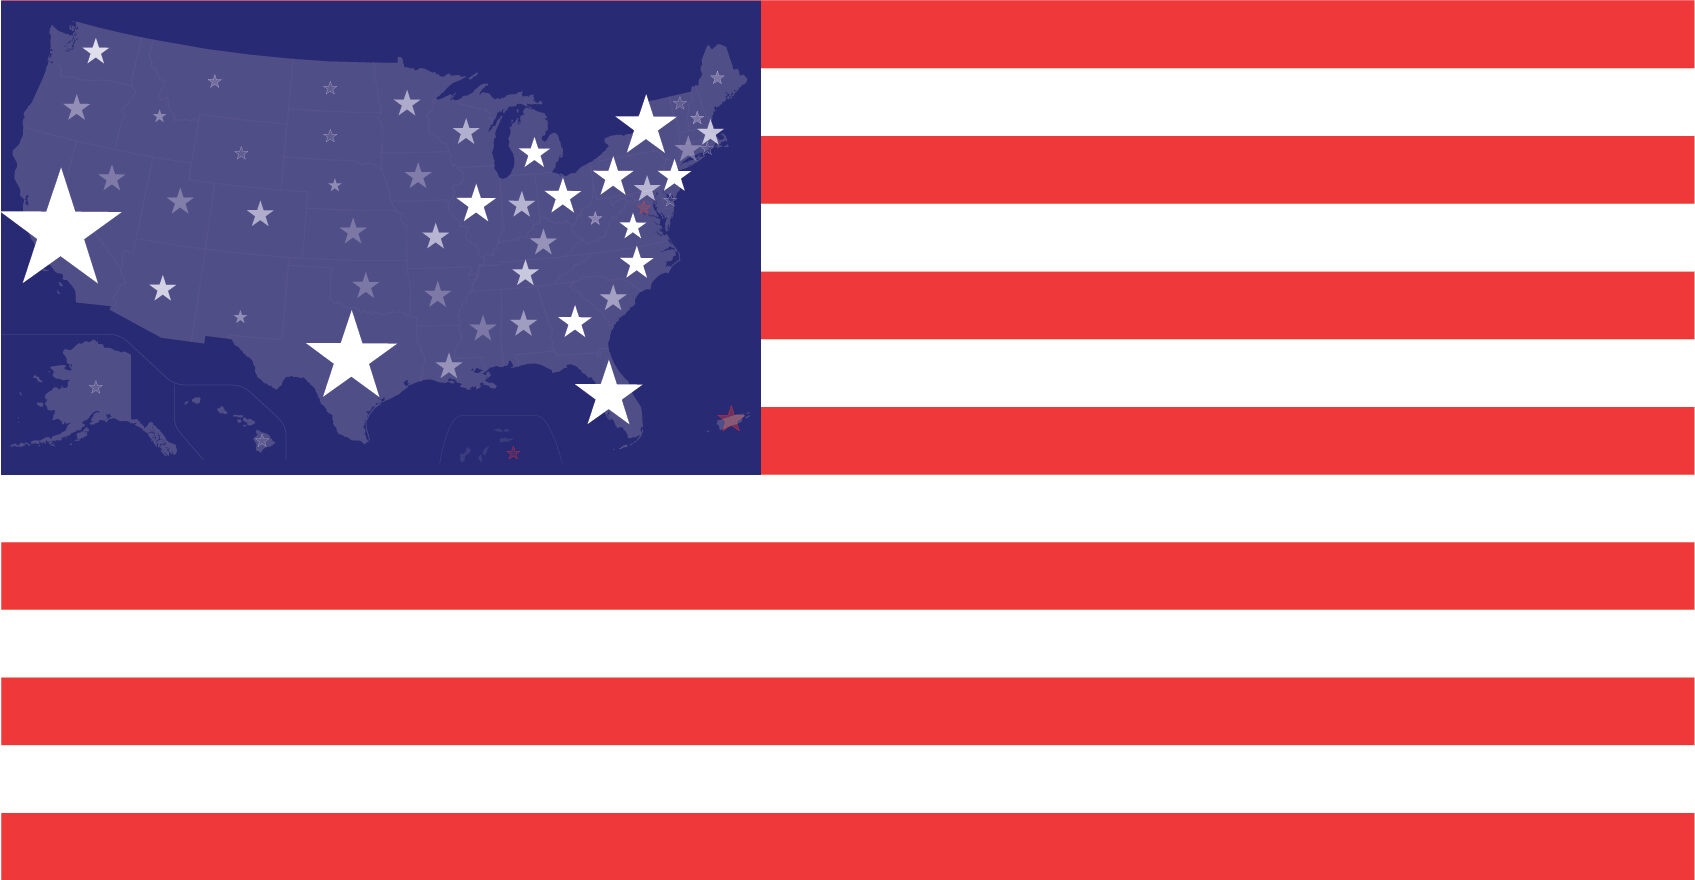 United States Flag with stars sized by population